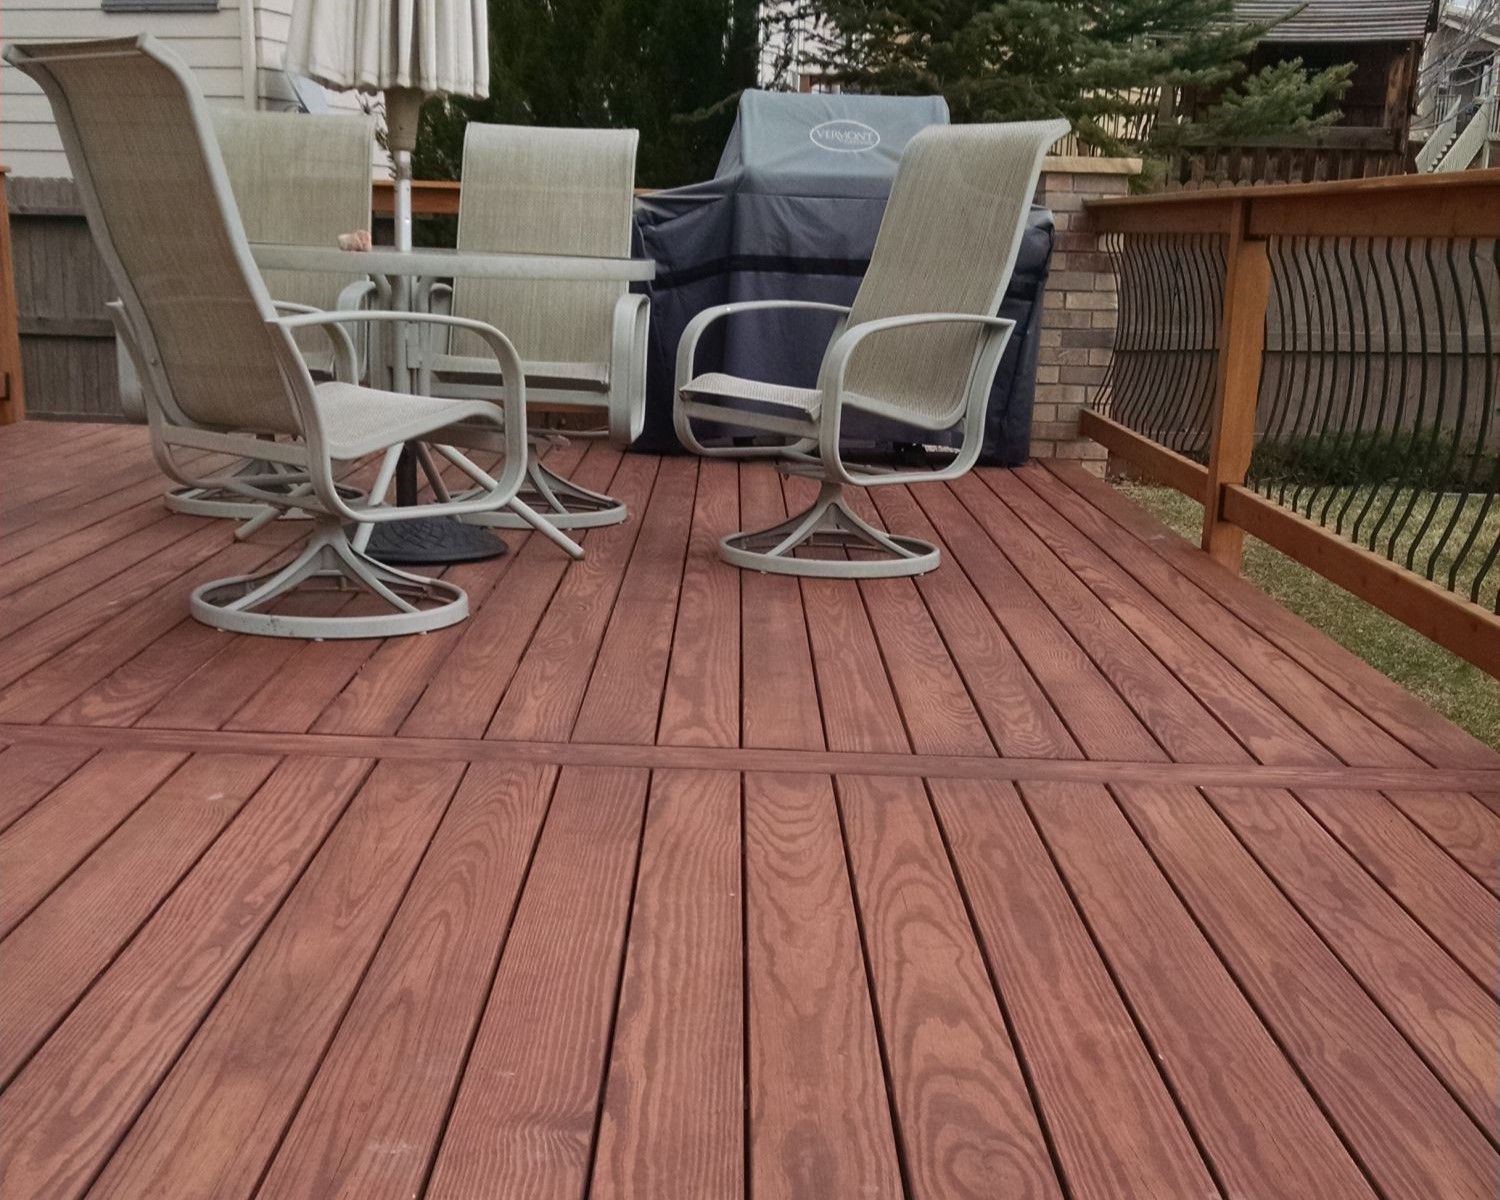 Redwood deck with the boards laid at 90-degrees. The railing features Vienna style balusters which bow out a little